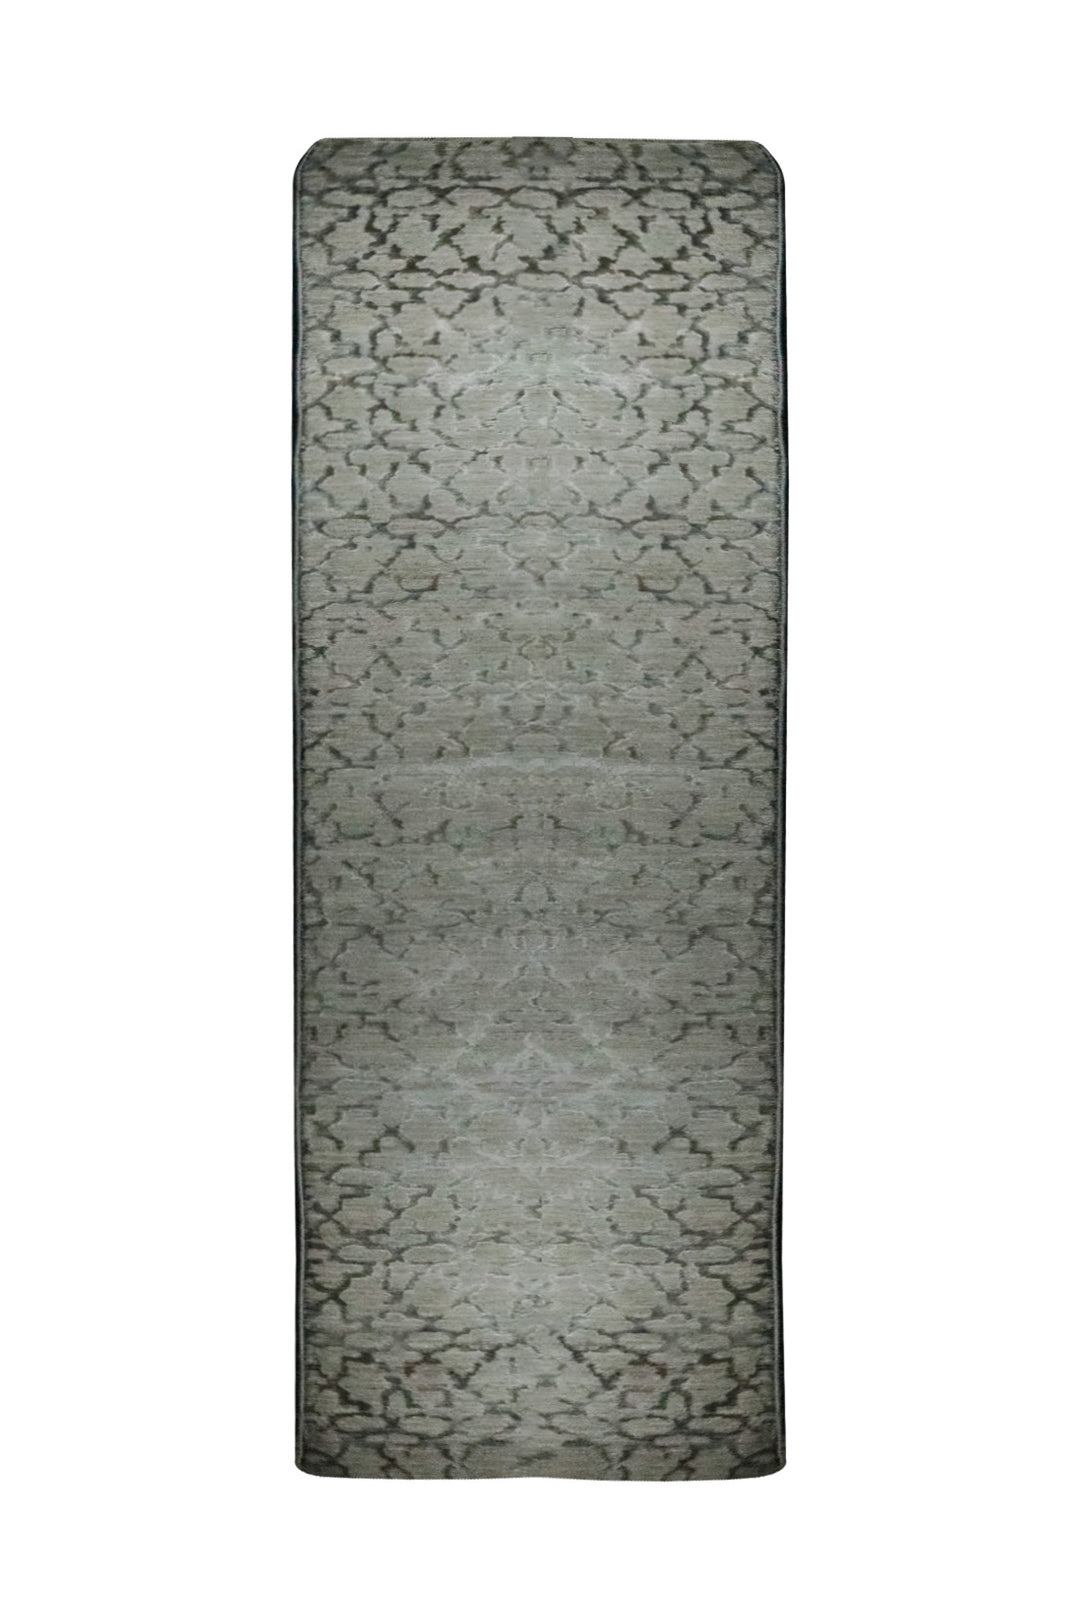 Turkish Modern Festival Plus Rug - 2.6 x 10. FT - Gray - Superior Comfort, Modern Style Accent Rugs